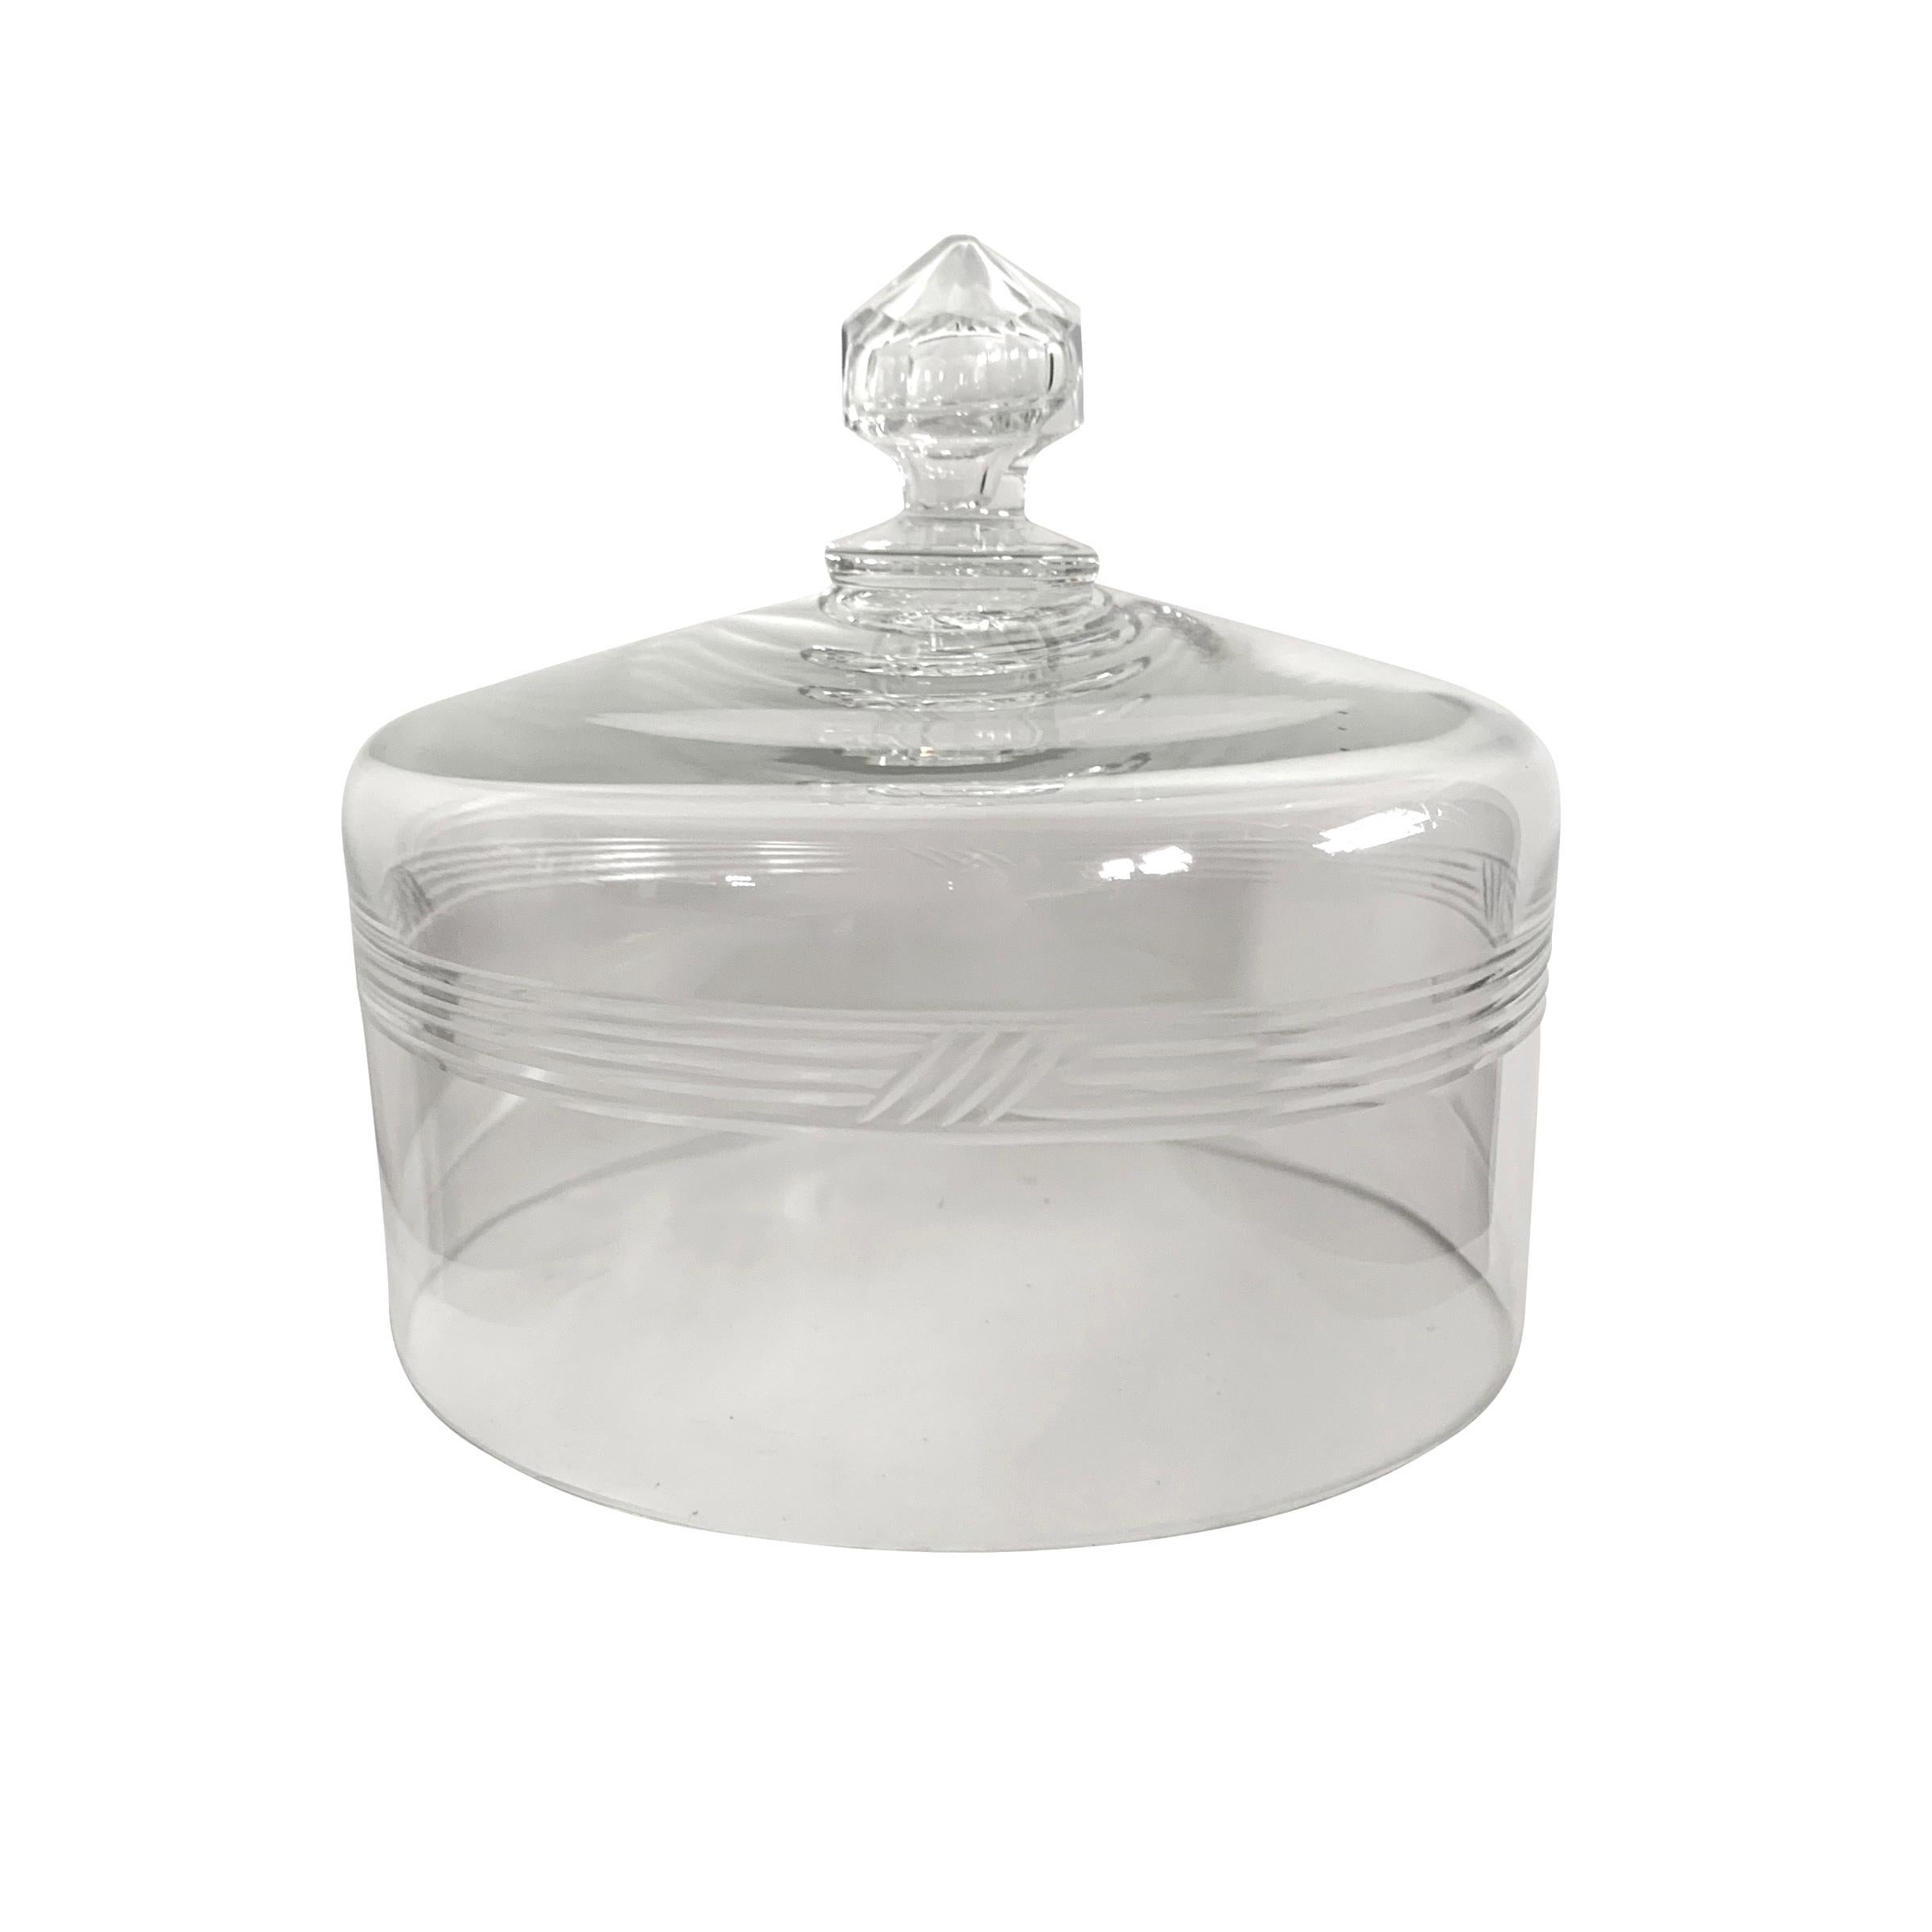 A wonderful 19th century English cut crystal cheese dome with captured bubble in the handle, and cut with several horizontal rings around the perimeter of the dome, resting atop an eight-sided spongeware plate.